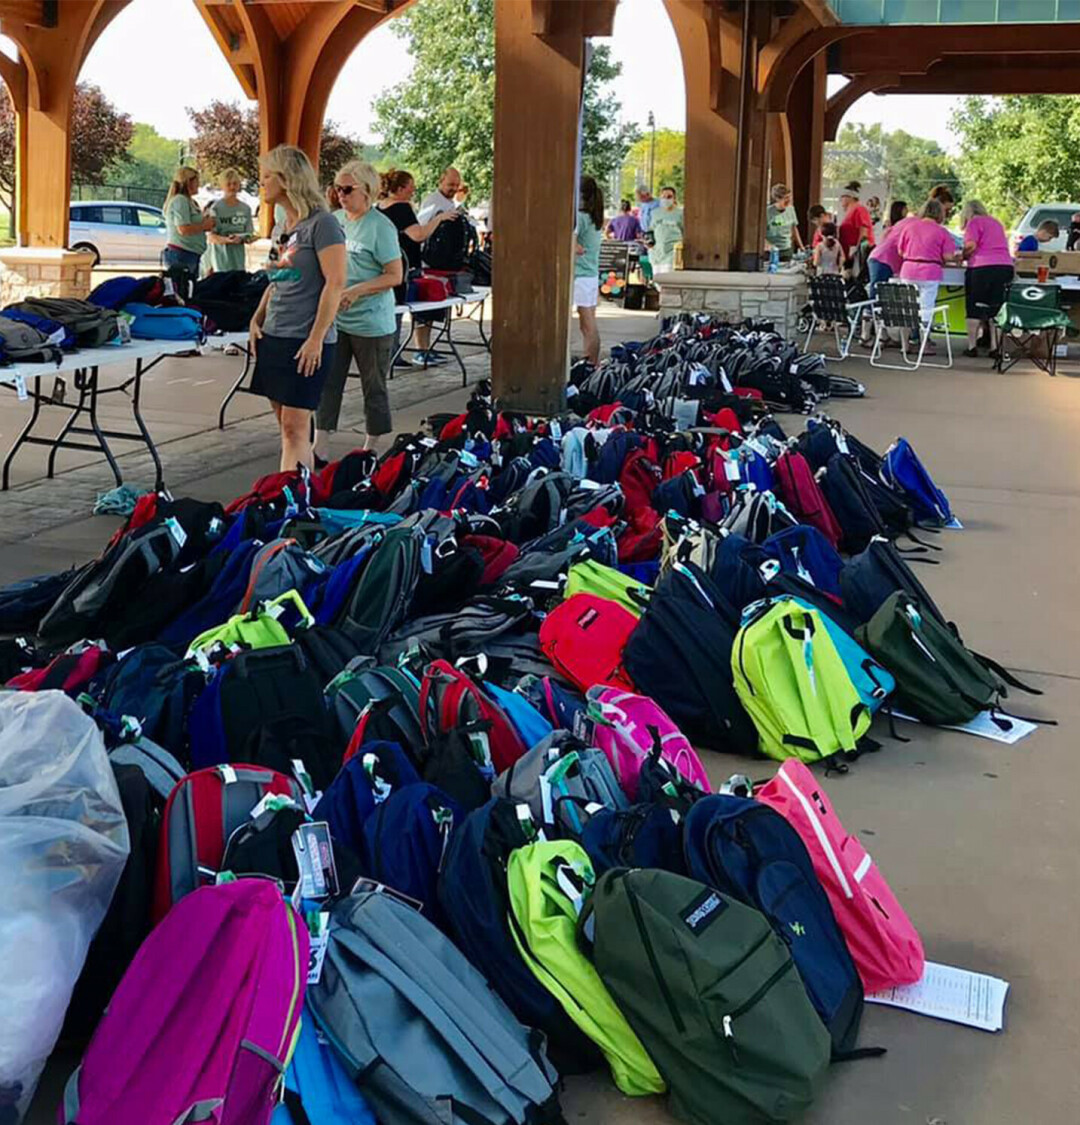 BACKPACKIN' INTO THE SCHOOL YEAR. Ahead of the new school year, WECARE Eau Claire is hosting its Back to School event offering ECASD families free school supplies.